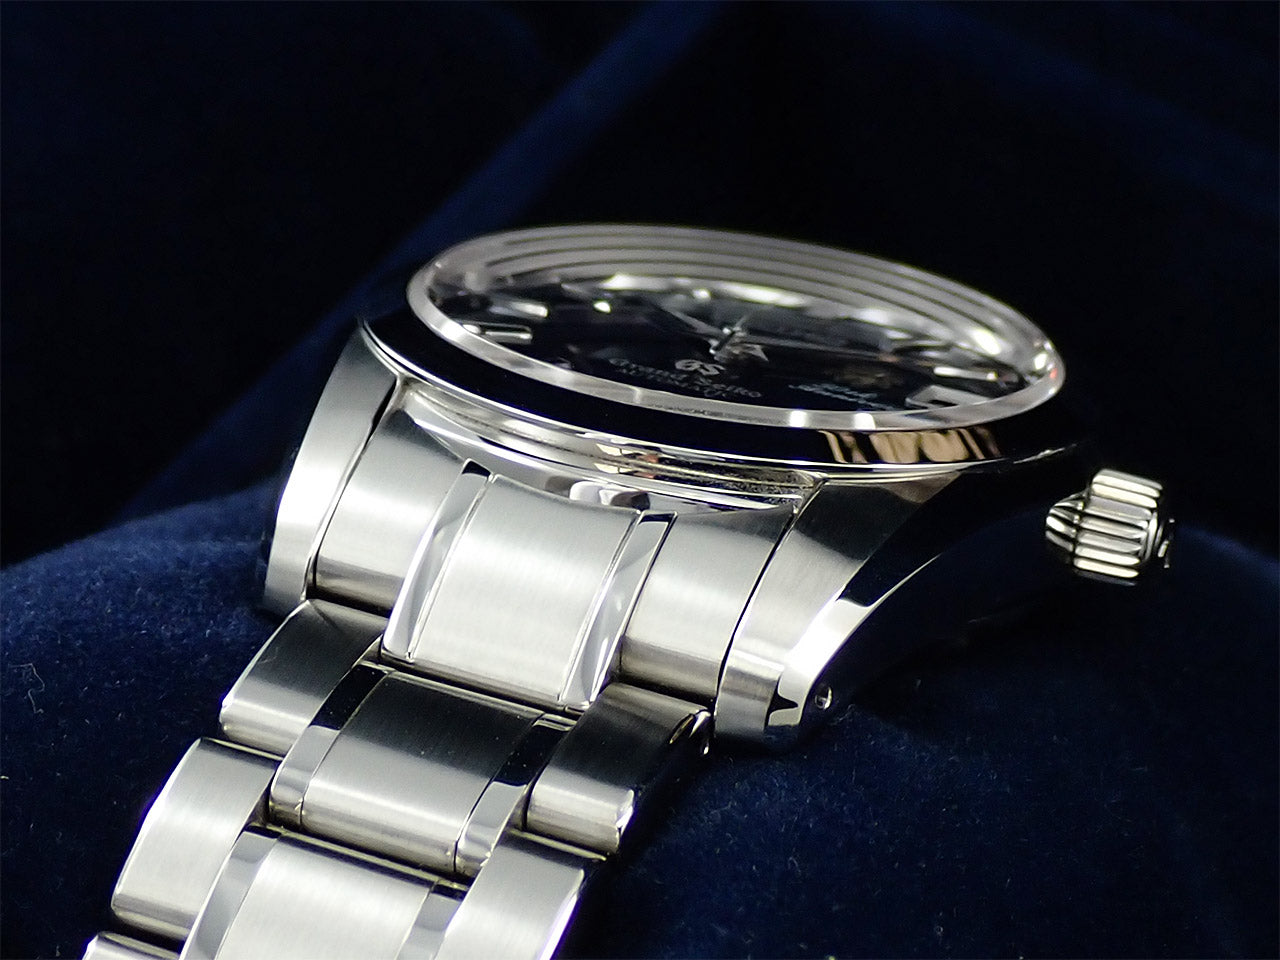 Grand Seiko Mechanical 50th Anniversary Model &lt;Box and Others&gt;